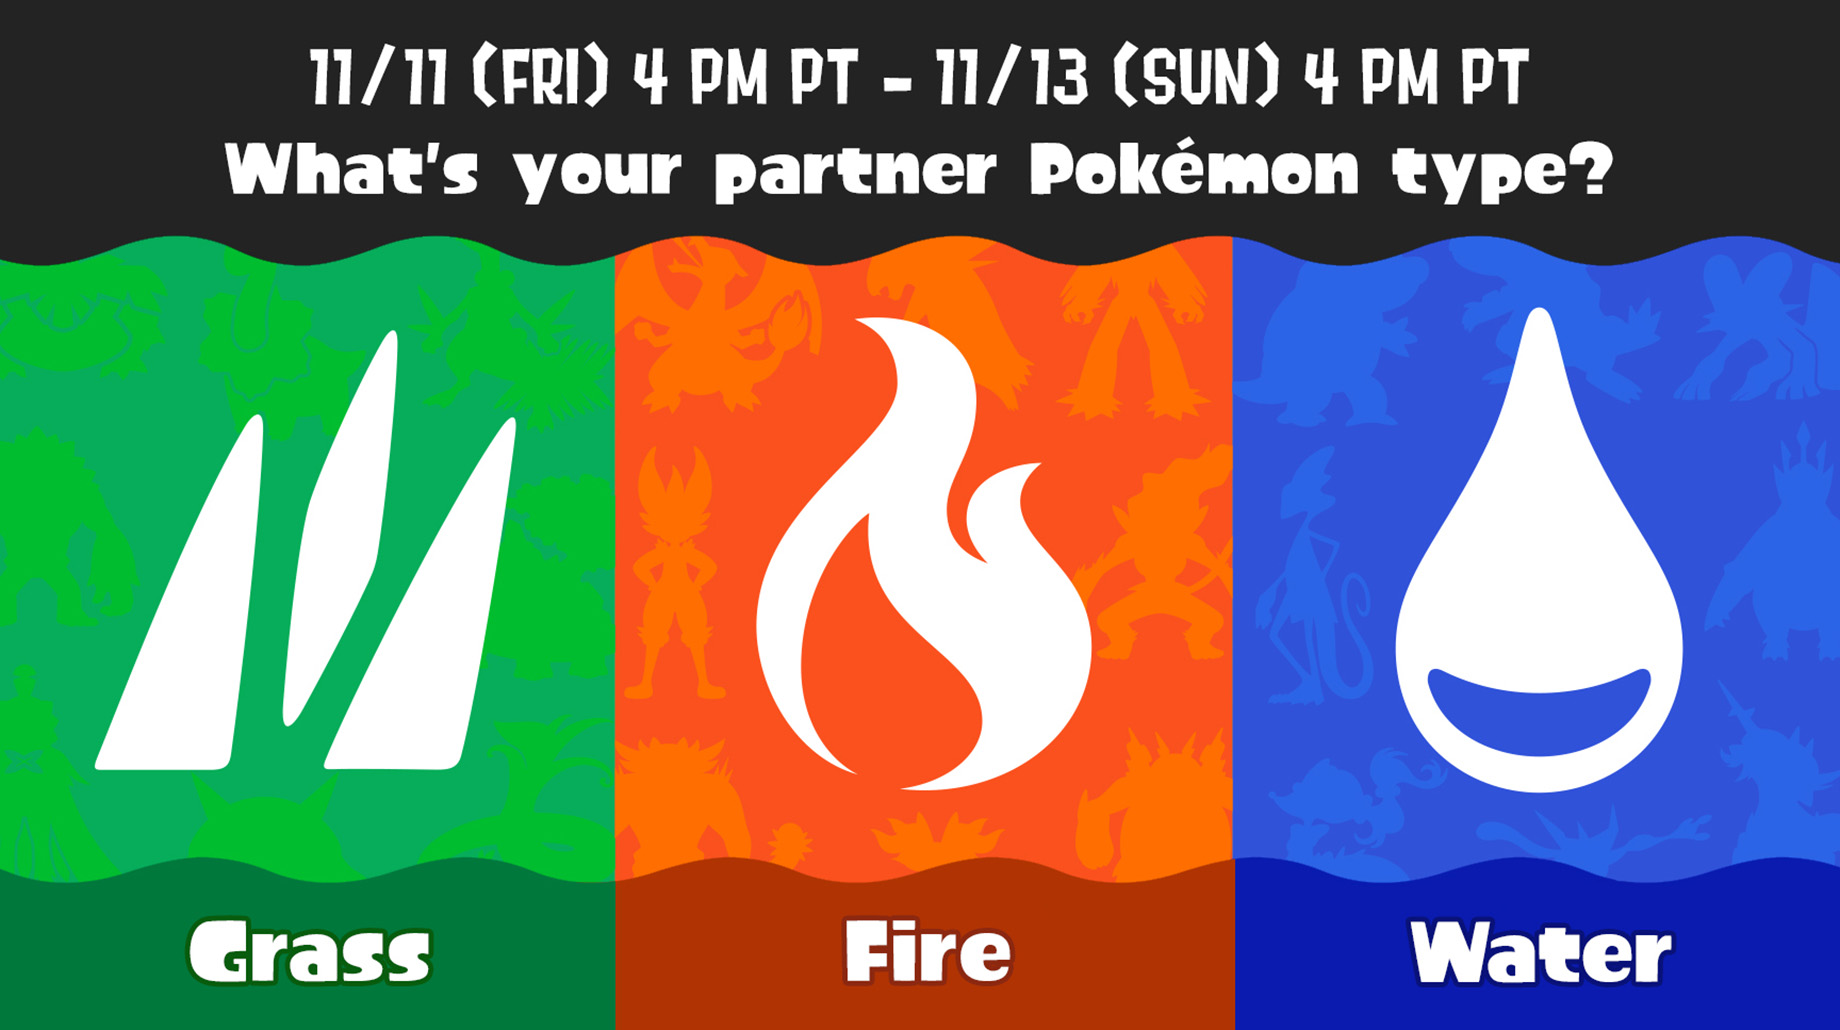 What's your partner Pokémon type? Grass, Fire, or Water?